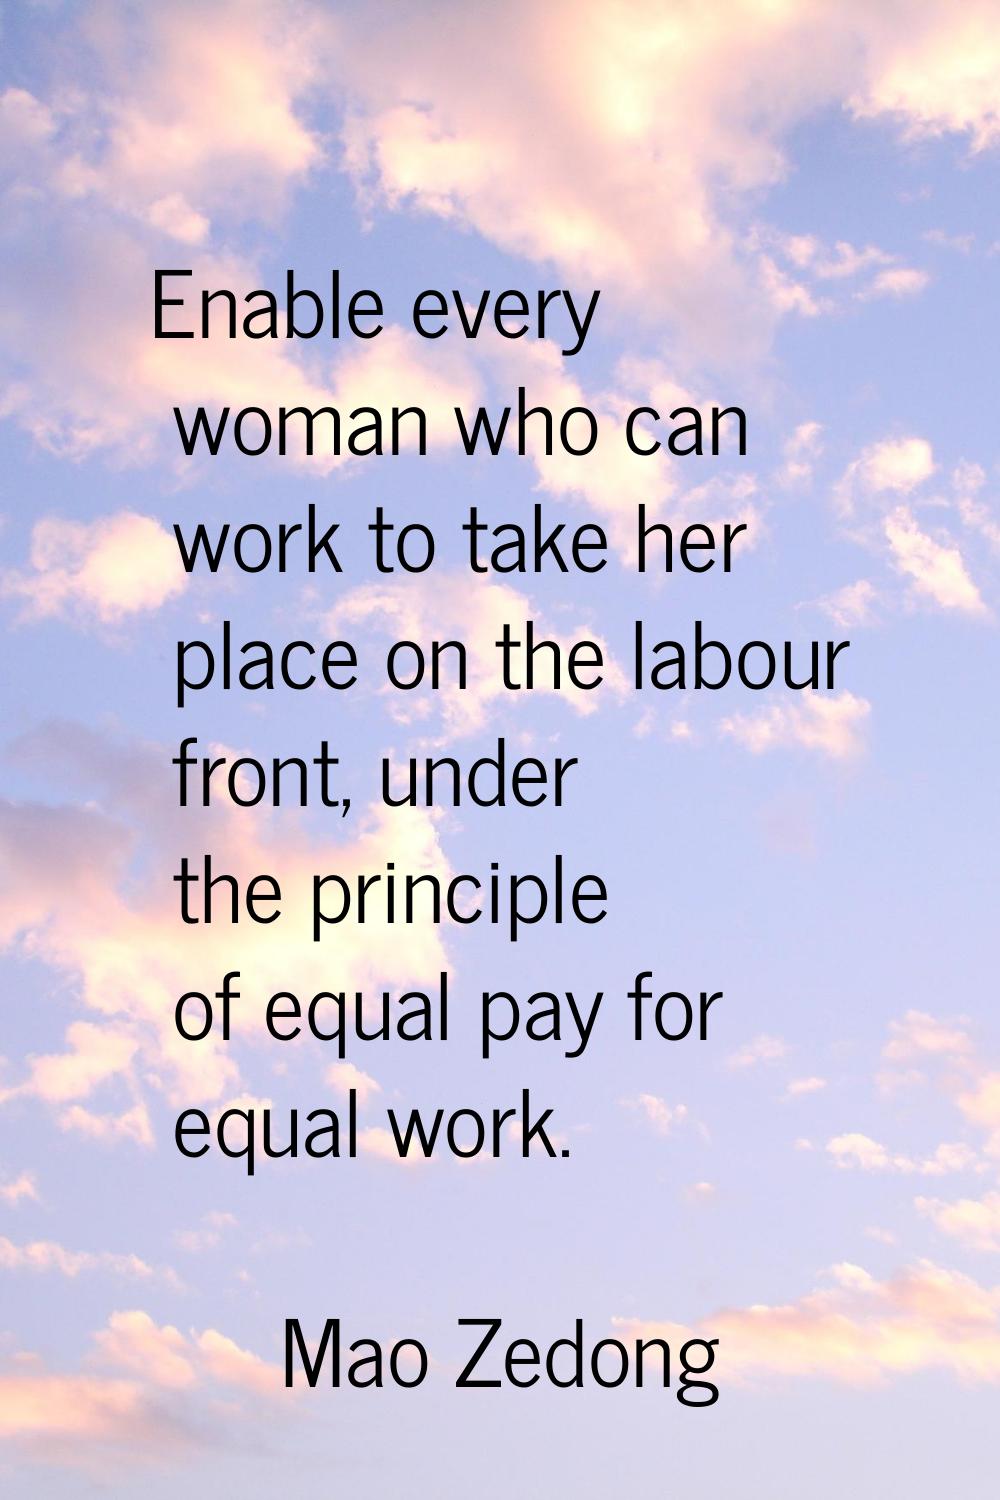 Enable every woman who can work to take her place on the labour front, under the principle of equal